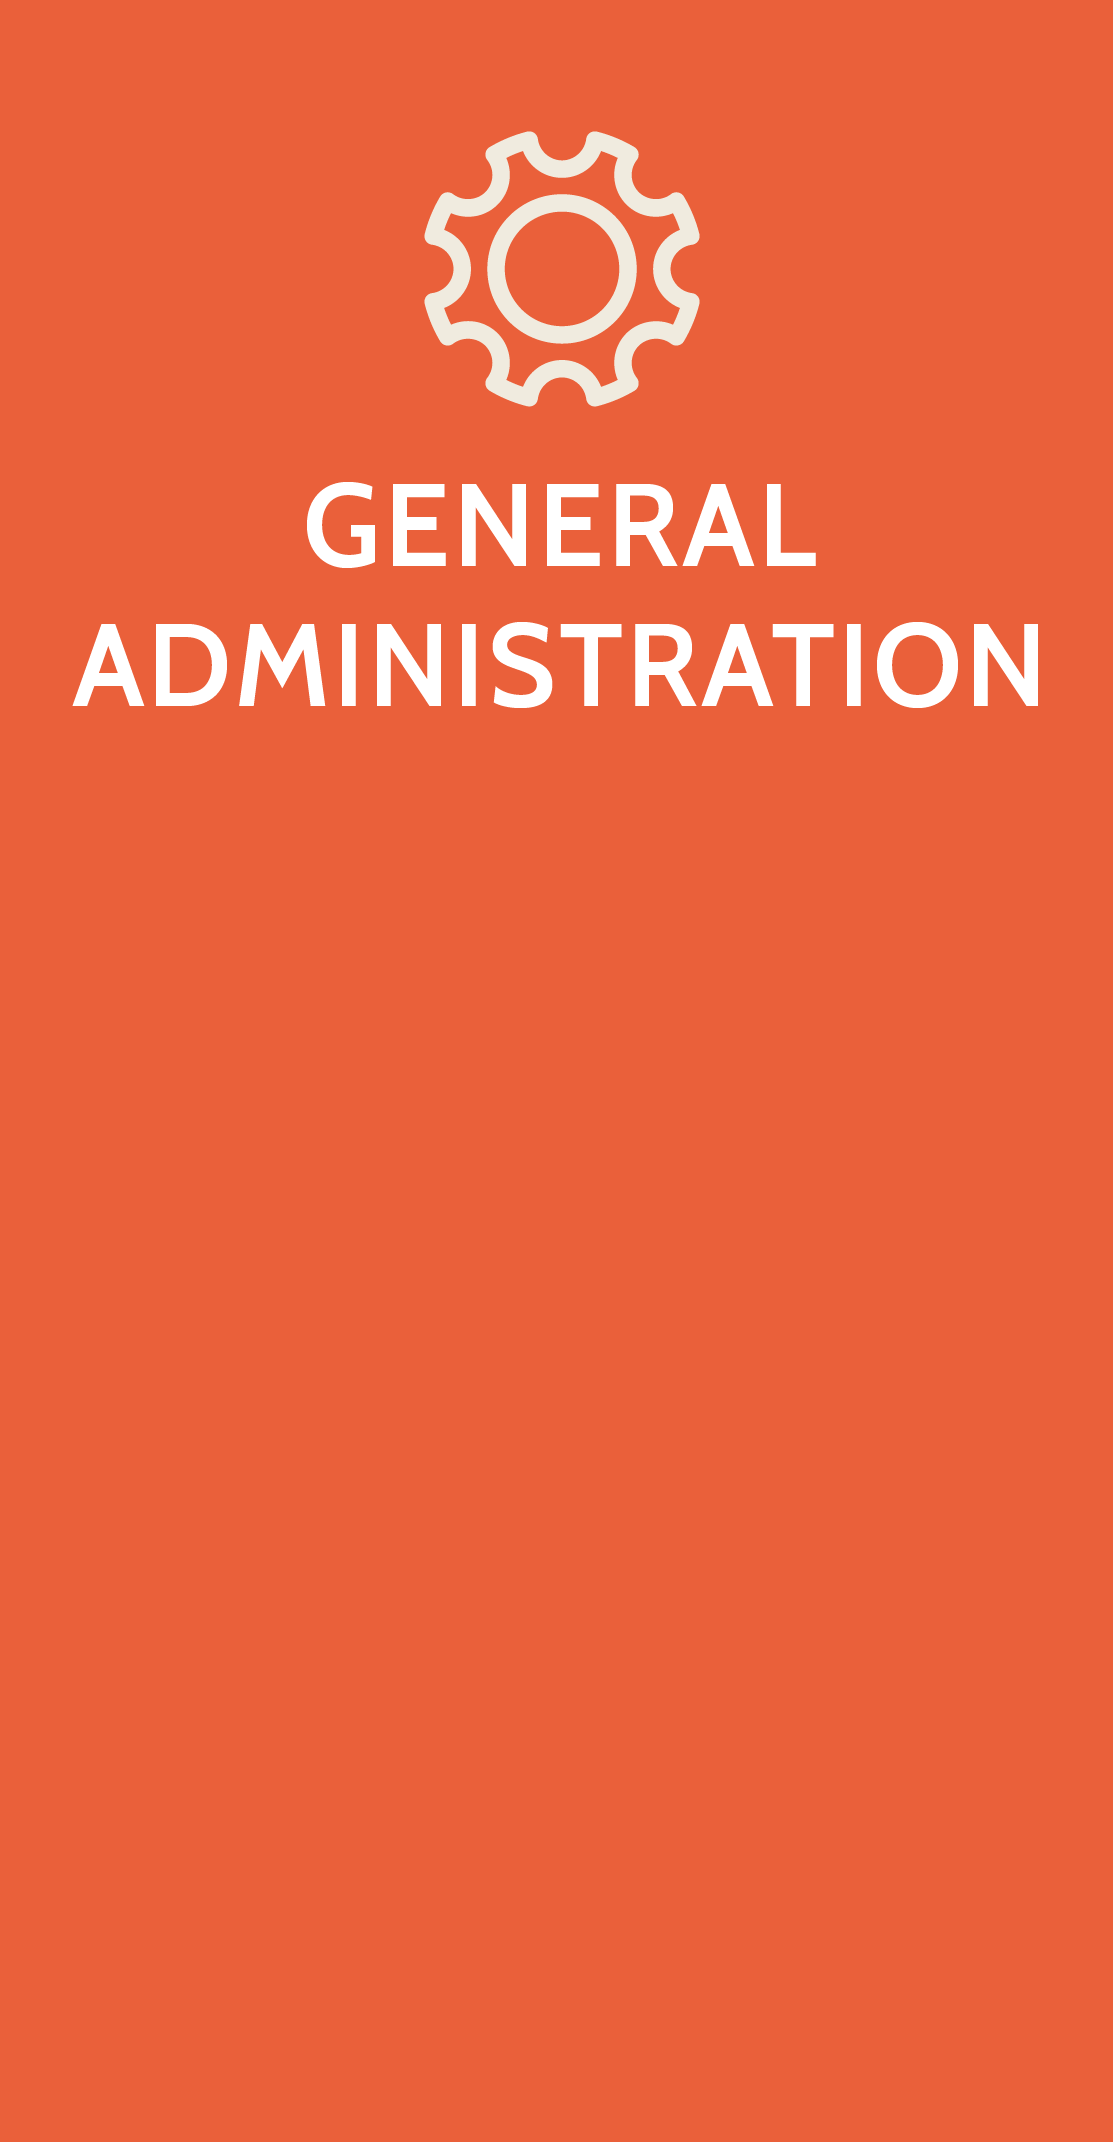 General Administration